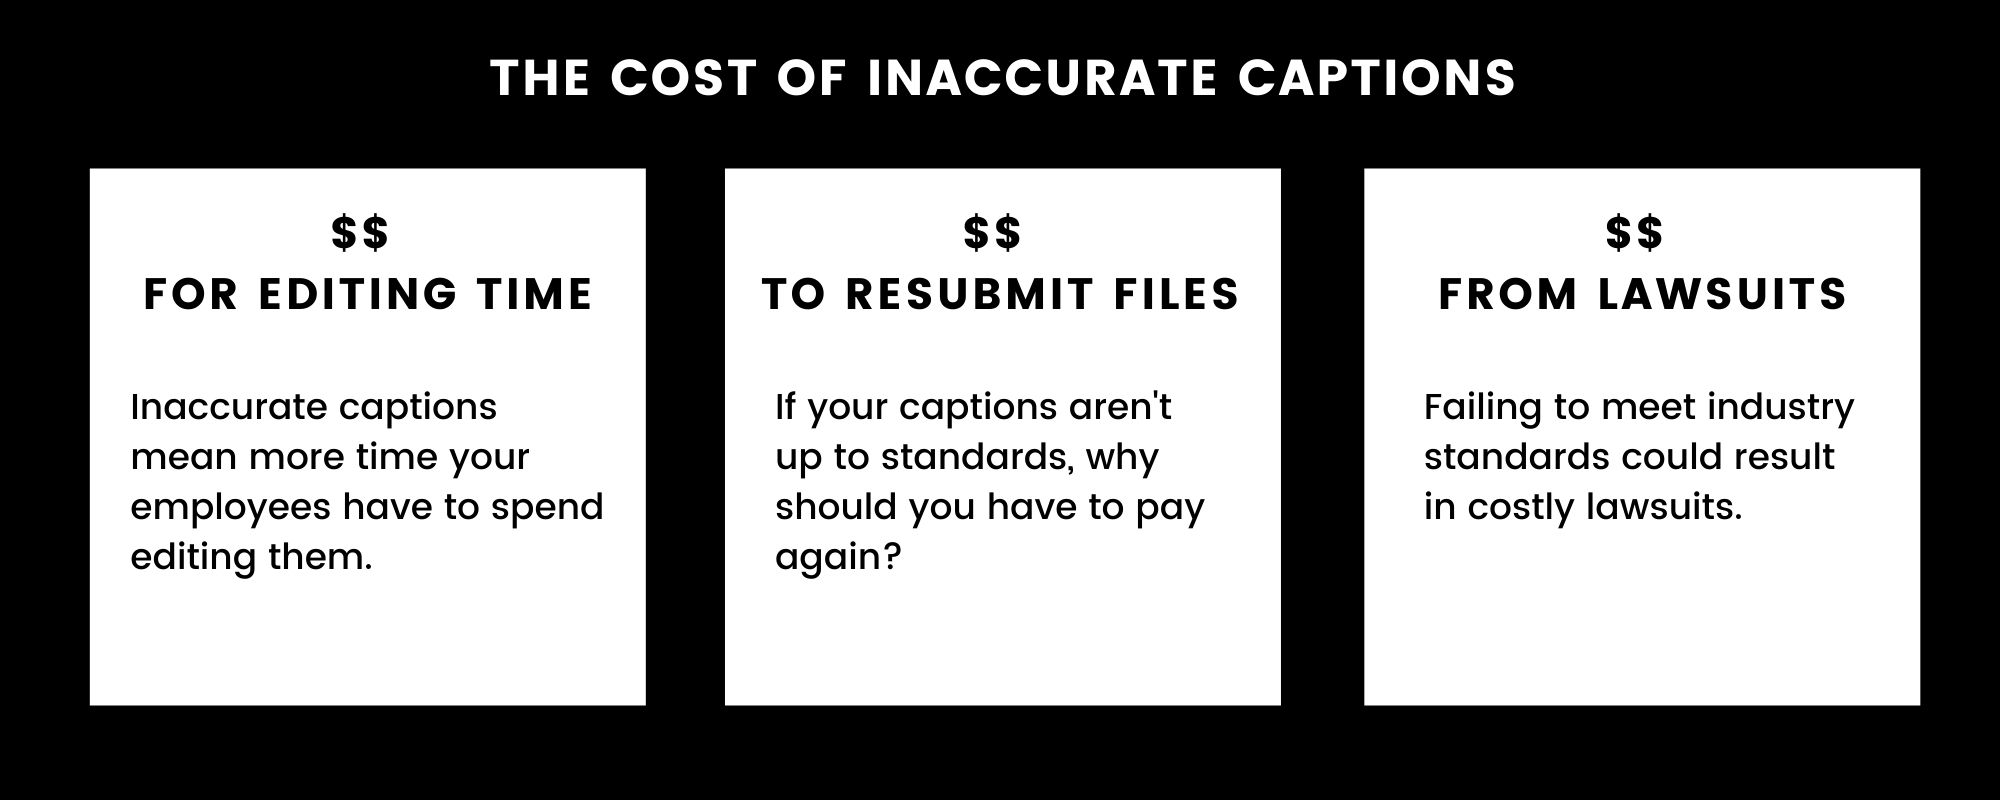  The cost of inaccurate captions. Money for editing: Inaccurate captions mean more time your employees have to spend editing them. Money to resubmit files: If your captions aren’t up to standards, why should you have to pay again? Money from lawsuits: Failing to meet industry standards could result in costly lawsuits.